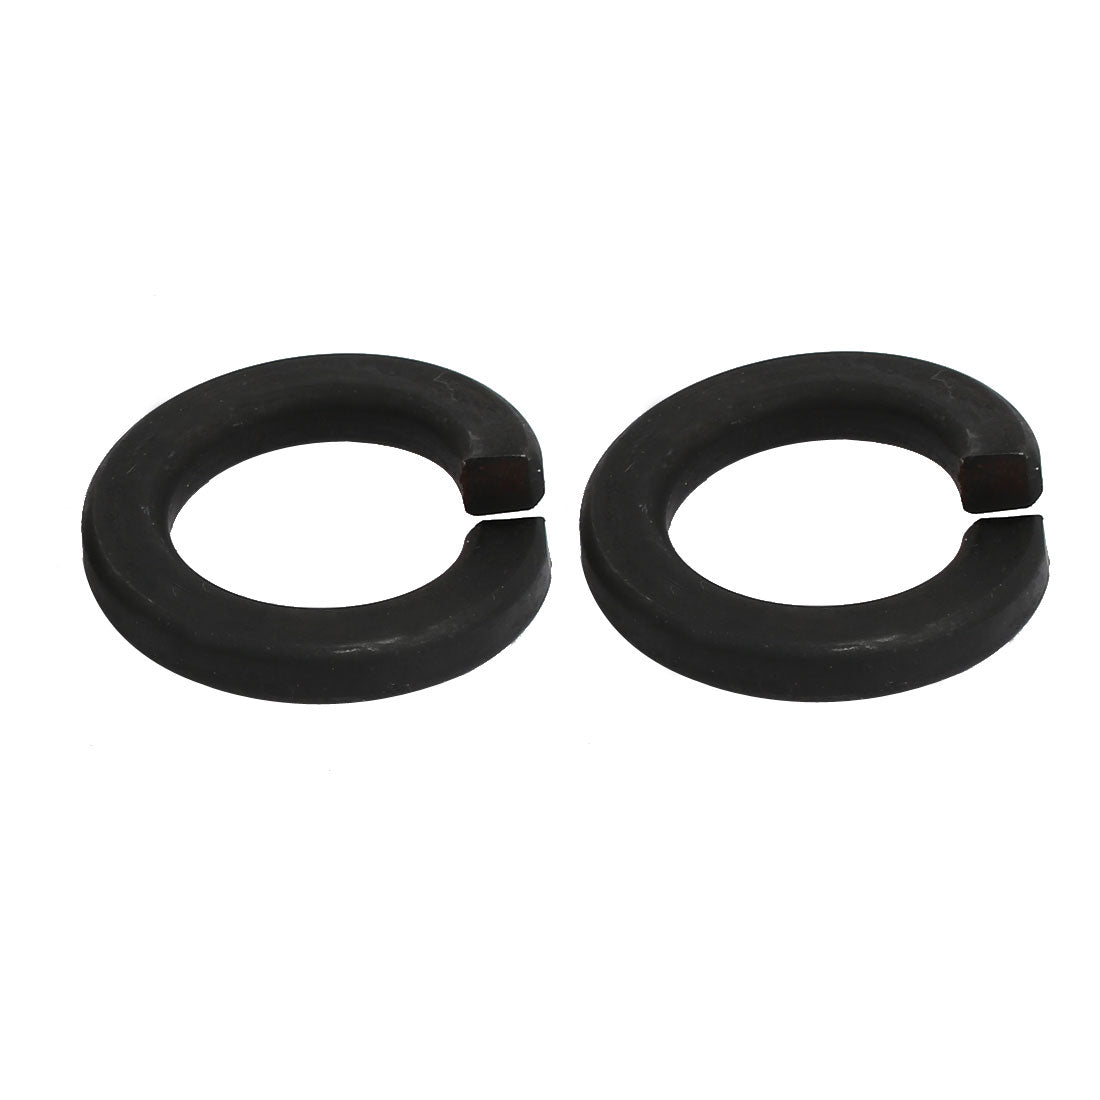 uxcell Uxcell 5pcs 1-inch Inner Dia Carbon Steel Split Lock Spring Washer Gasket Black